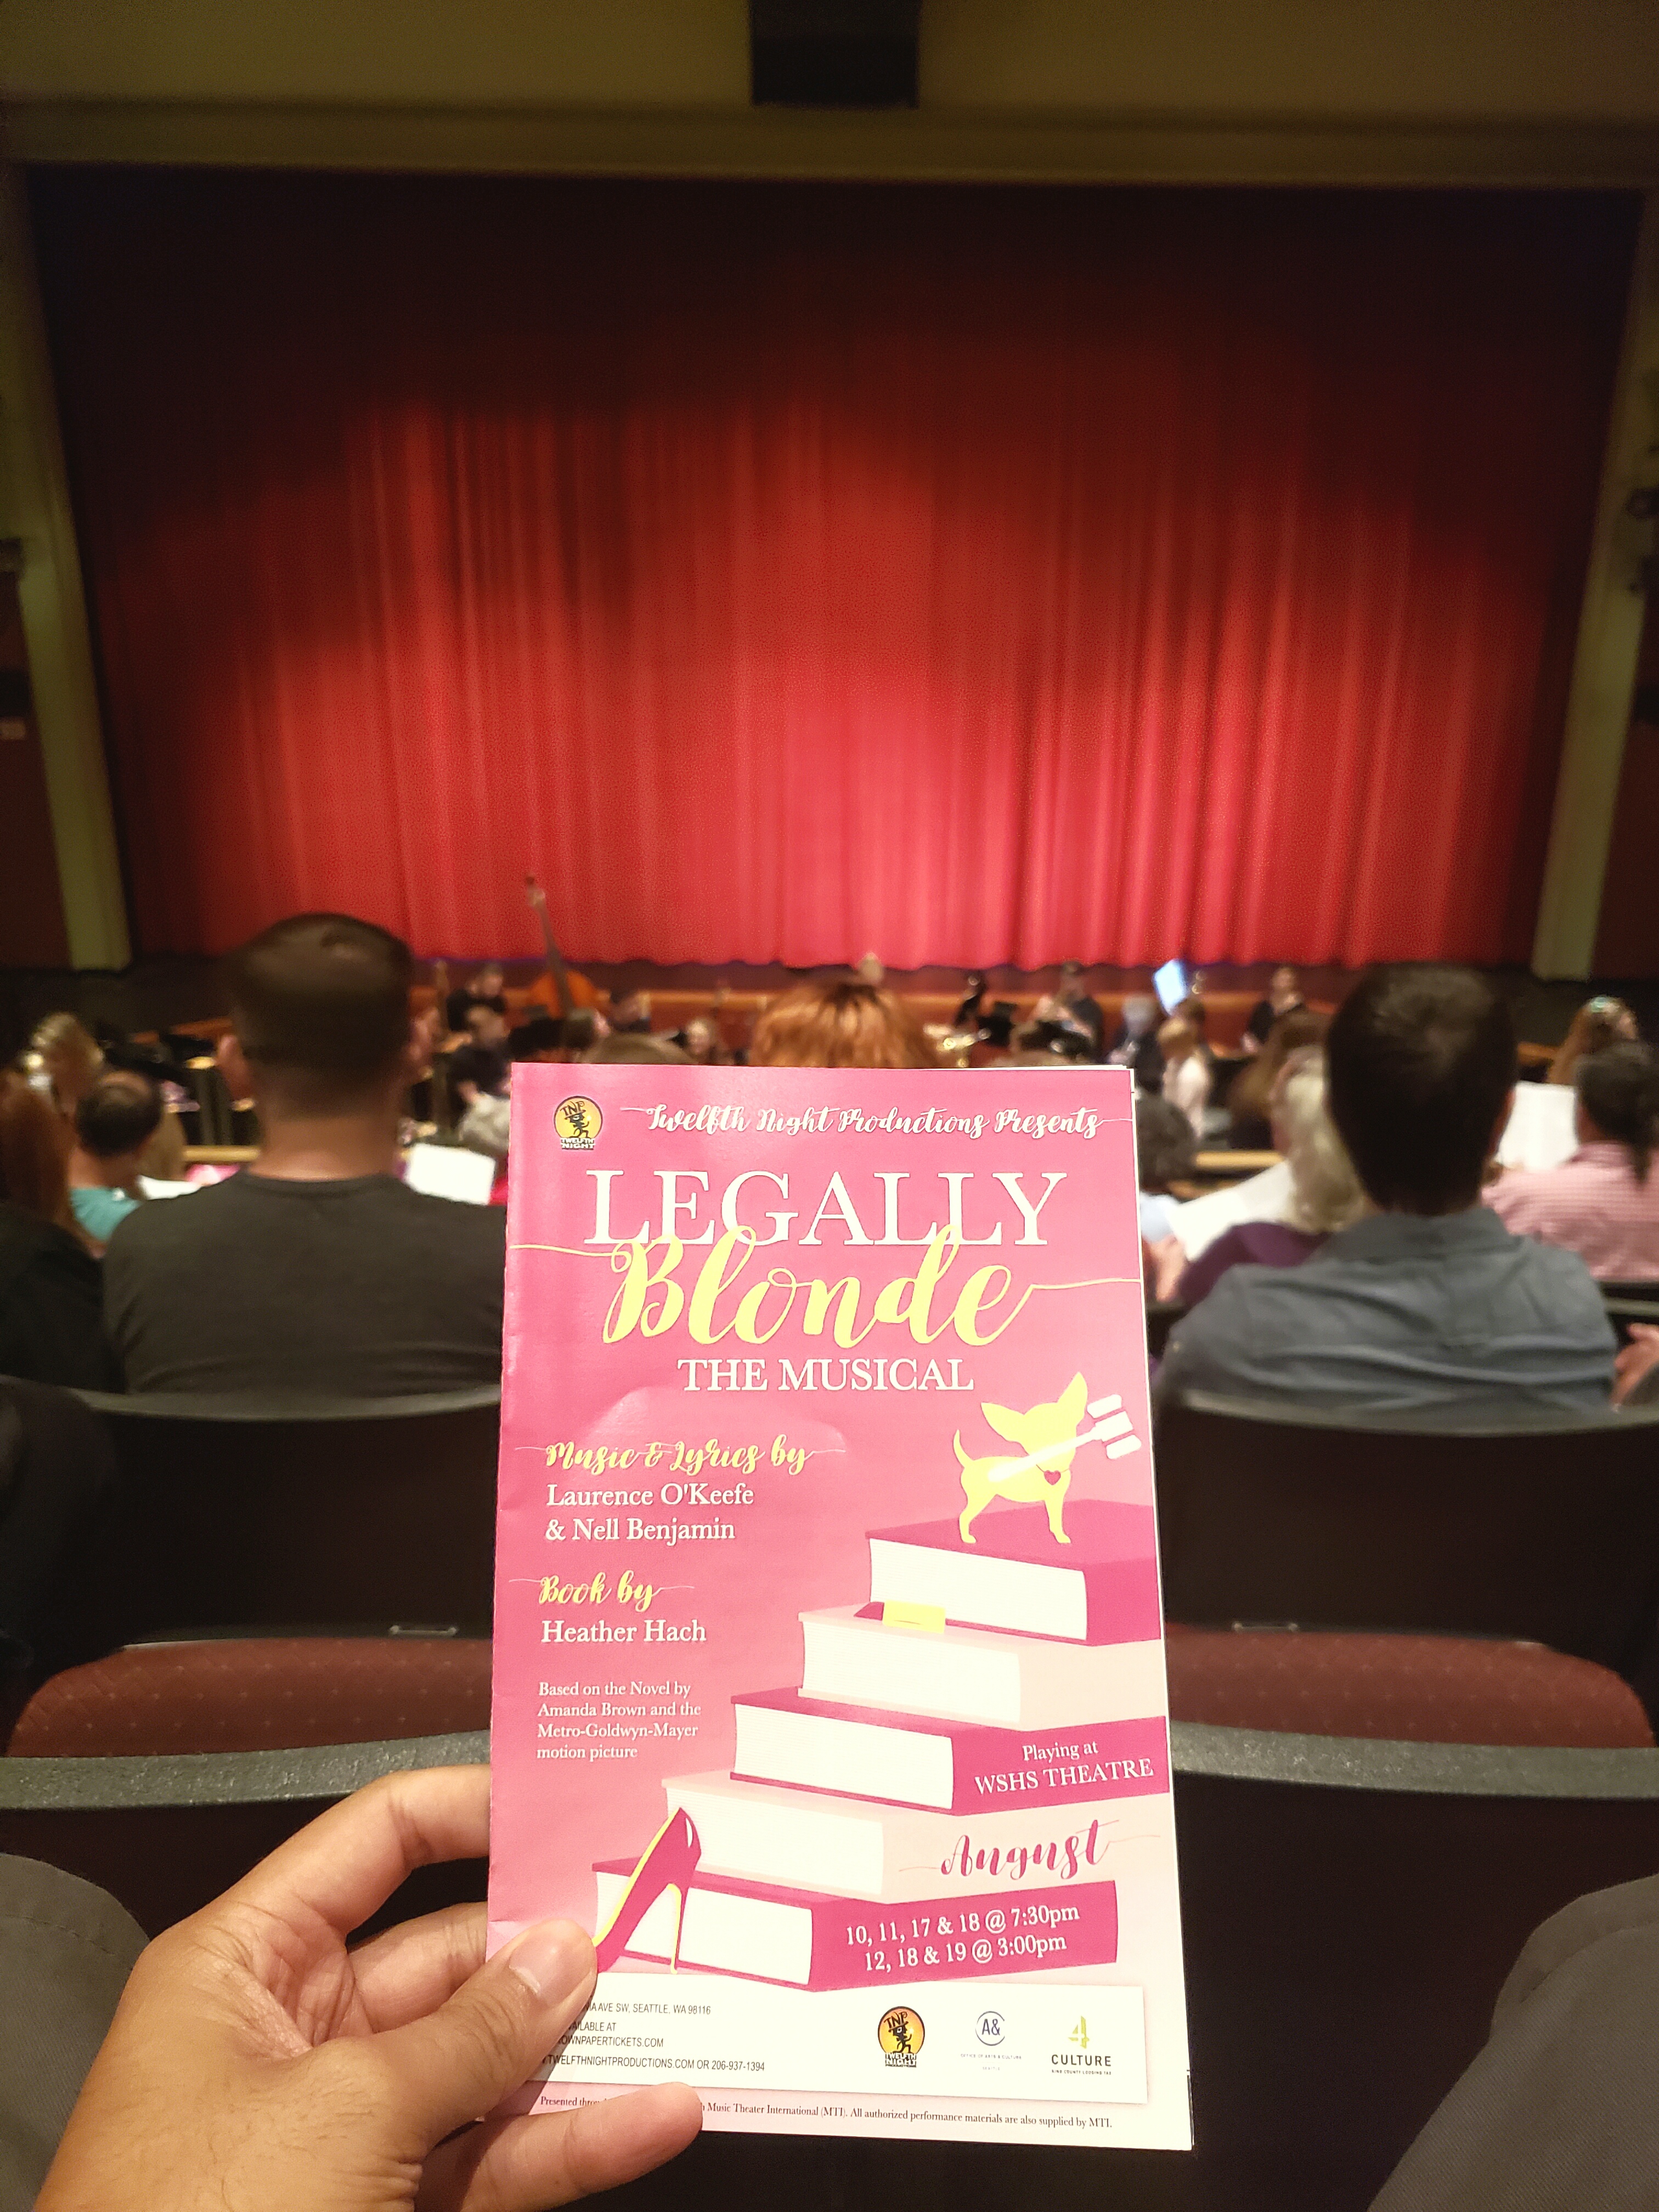 Last performance of Legally Blonde the Musical. Mics should have more volume. Slower tempo than other productions I've seen. Supporting cast was strong (more than main characters). Huge unrealized potential here!